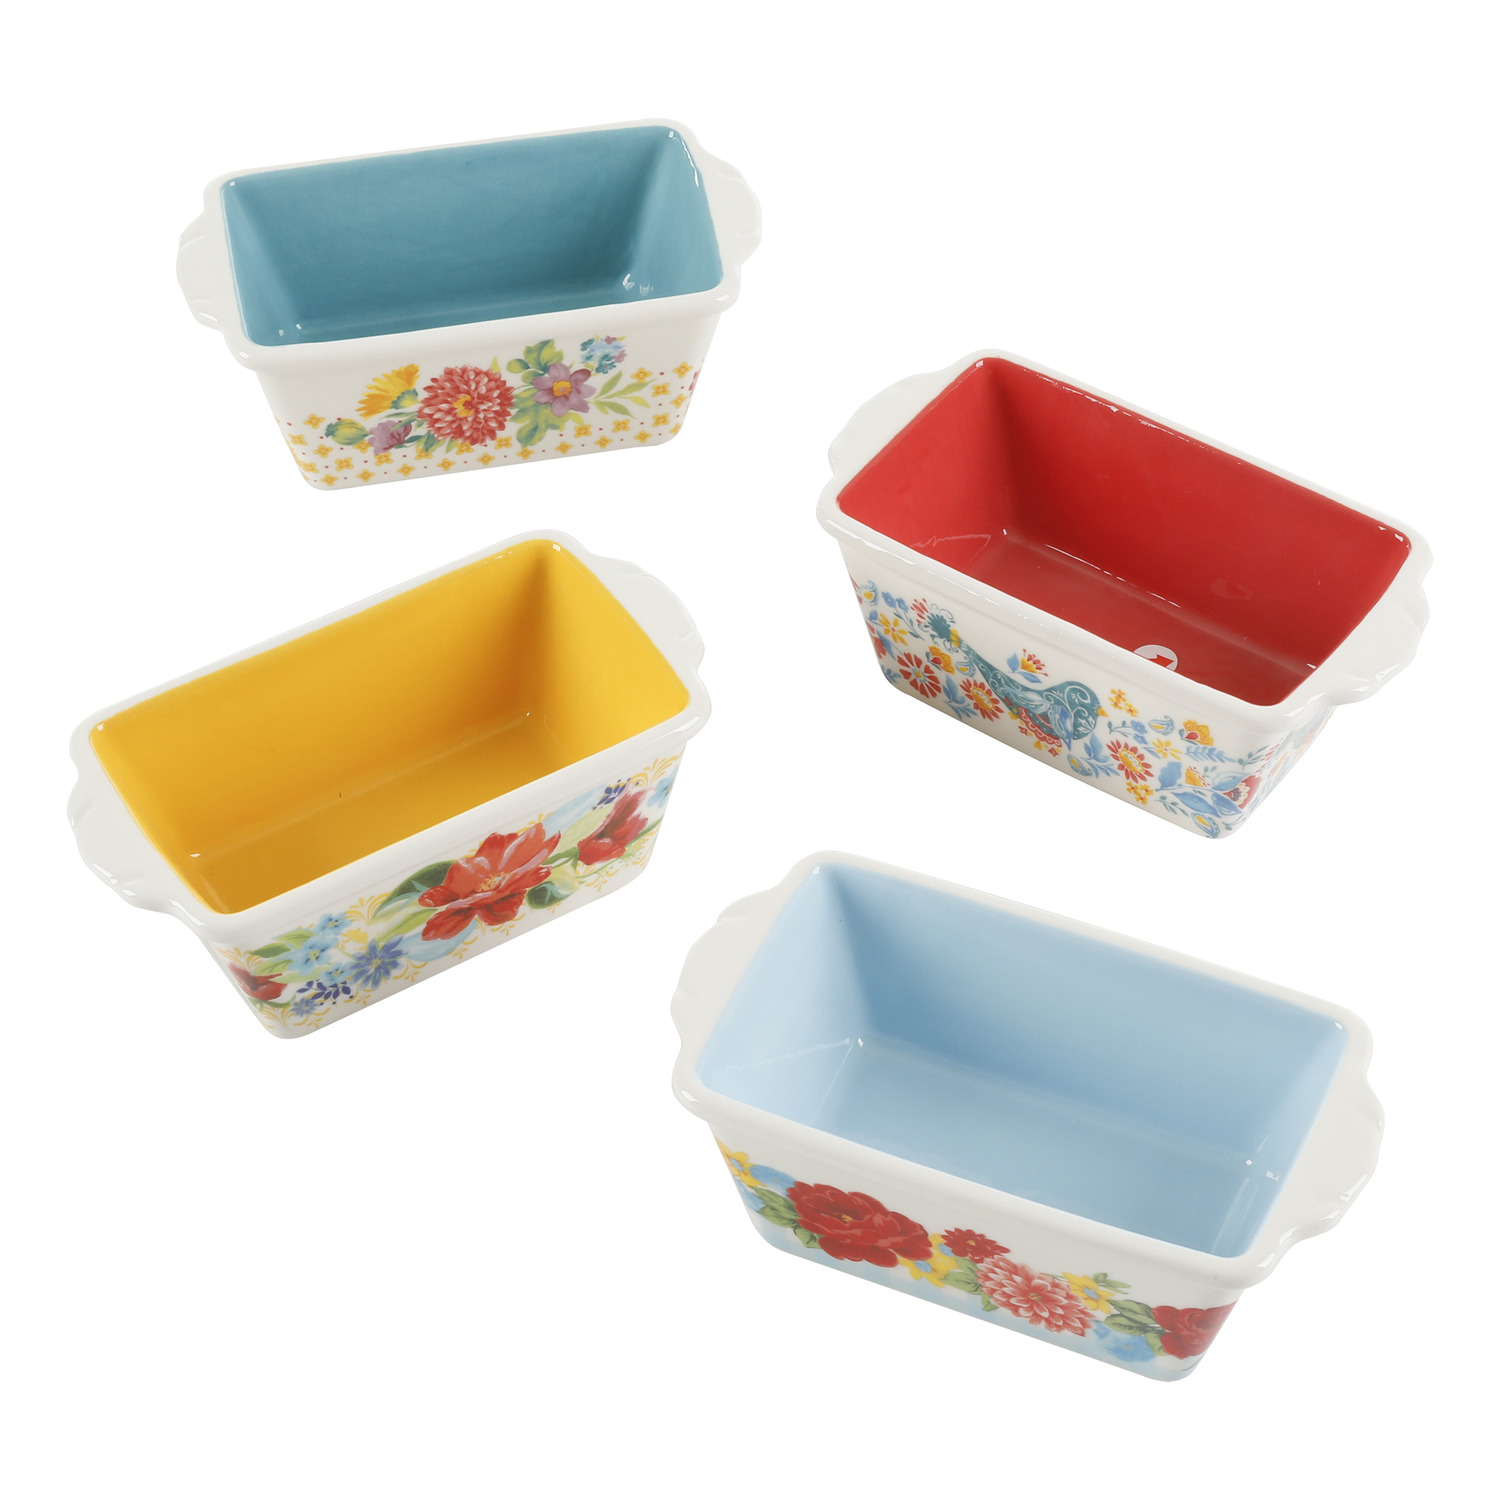 Pioneer Woman Ceramic Bread Loaf Pan Set of 4 - Floral Medley - NEW IN BOX